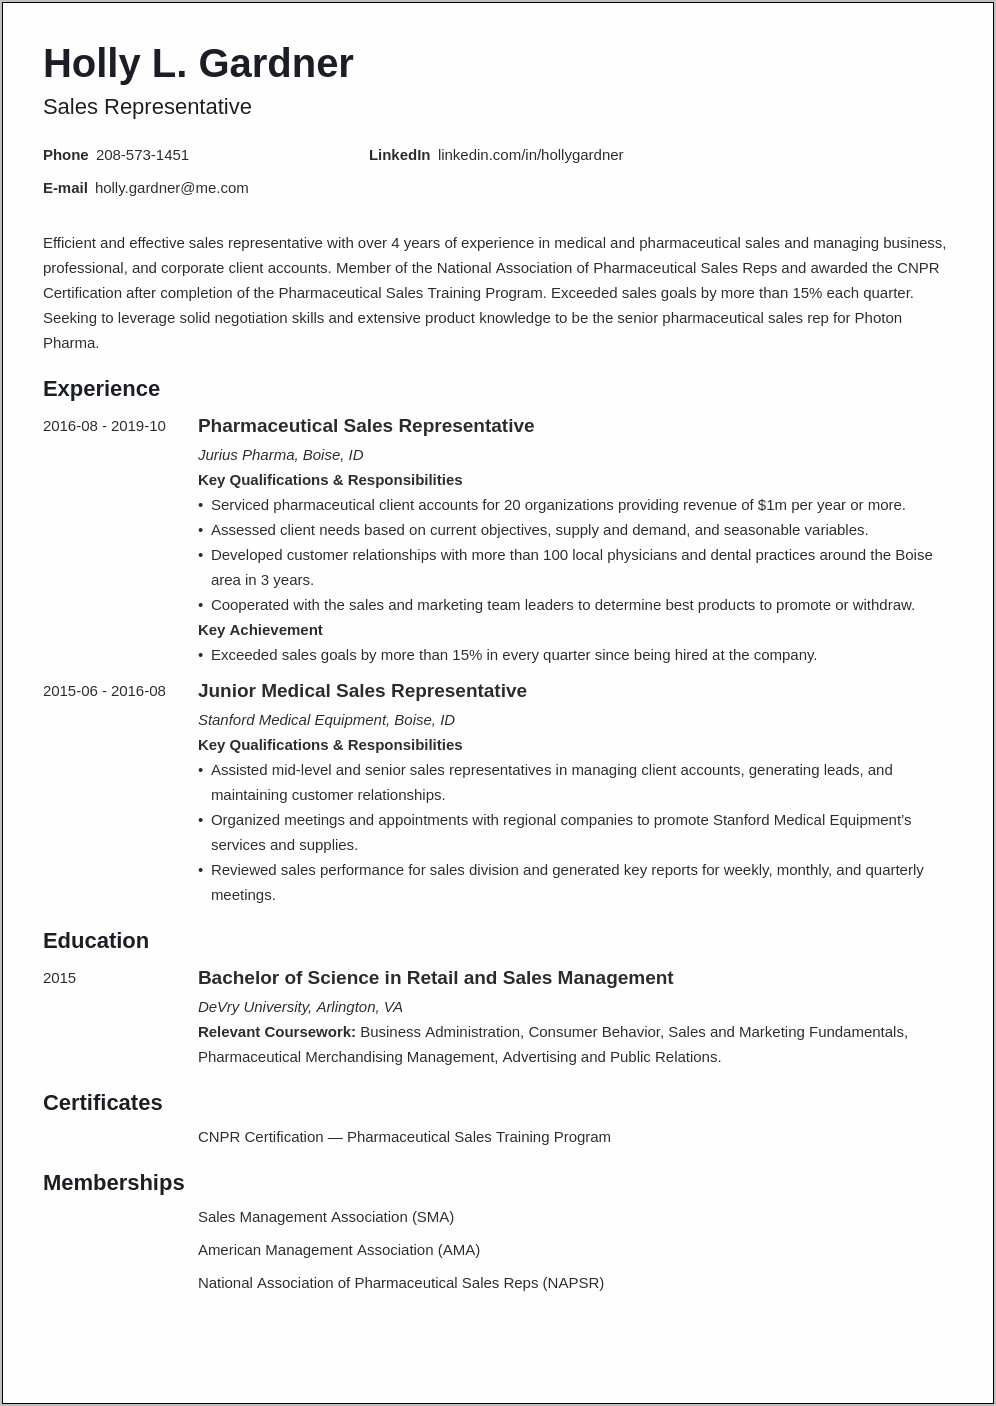 Resume For Sales Manager Job